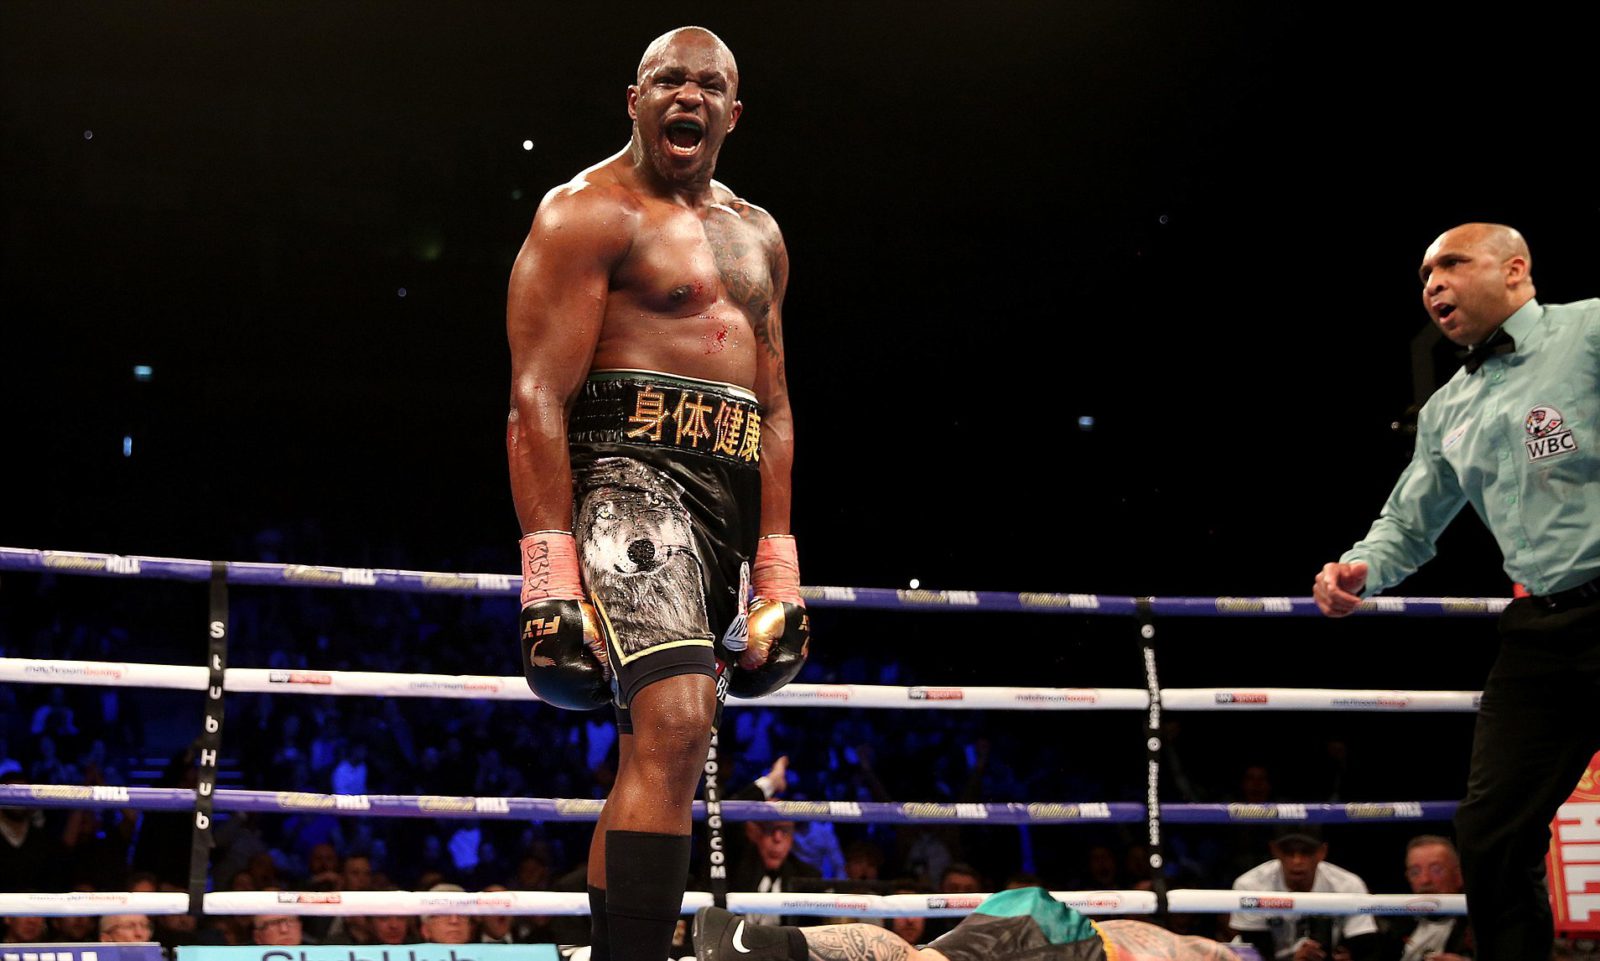 Dillian Whyte (left) celebrates after knocking out Lucas Browne (centre) in the WBC Silver Heavyweight Championship contest at the O2 Arena, London. PRESS ASSOCIATION Photo. Picture date: Saturday March 24, 2018. See PA story BOXING London. Photo credit should read: Steven Paston/PA Wire